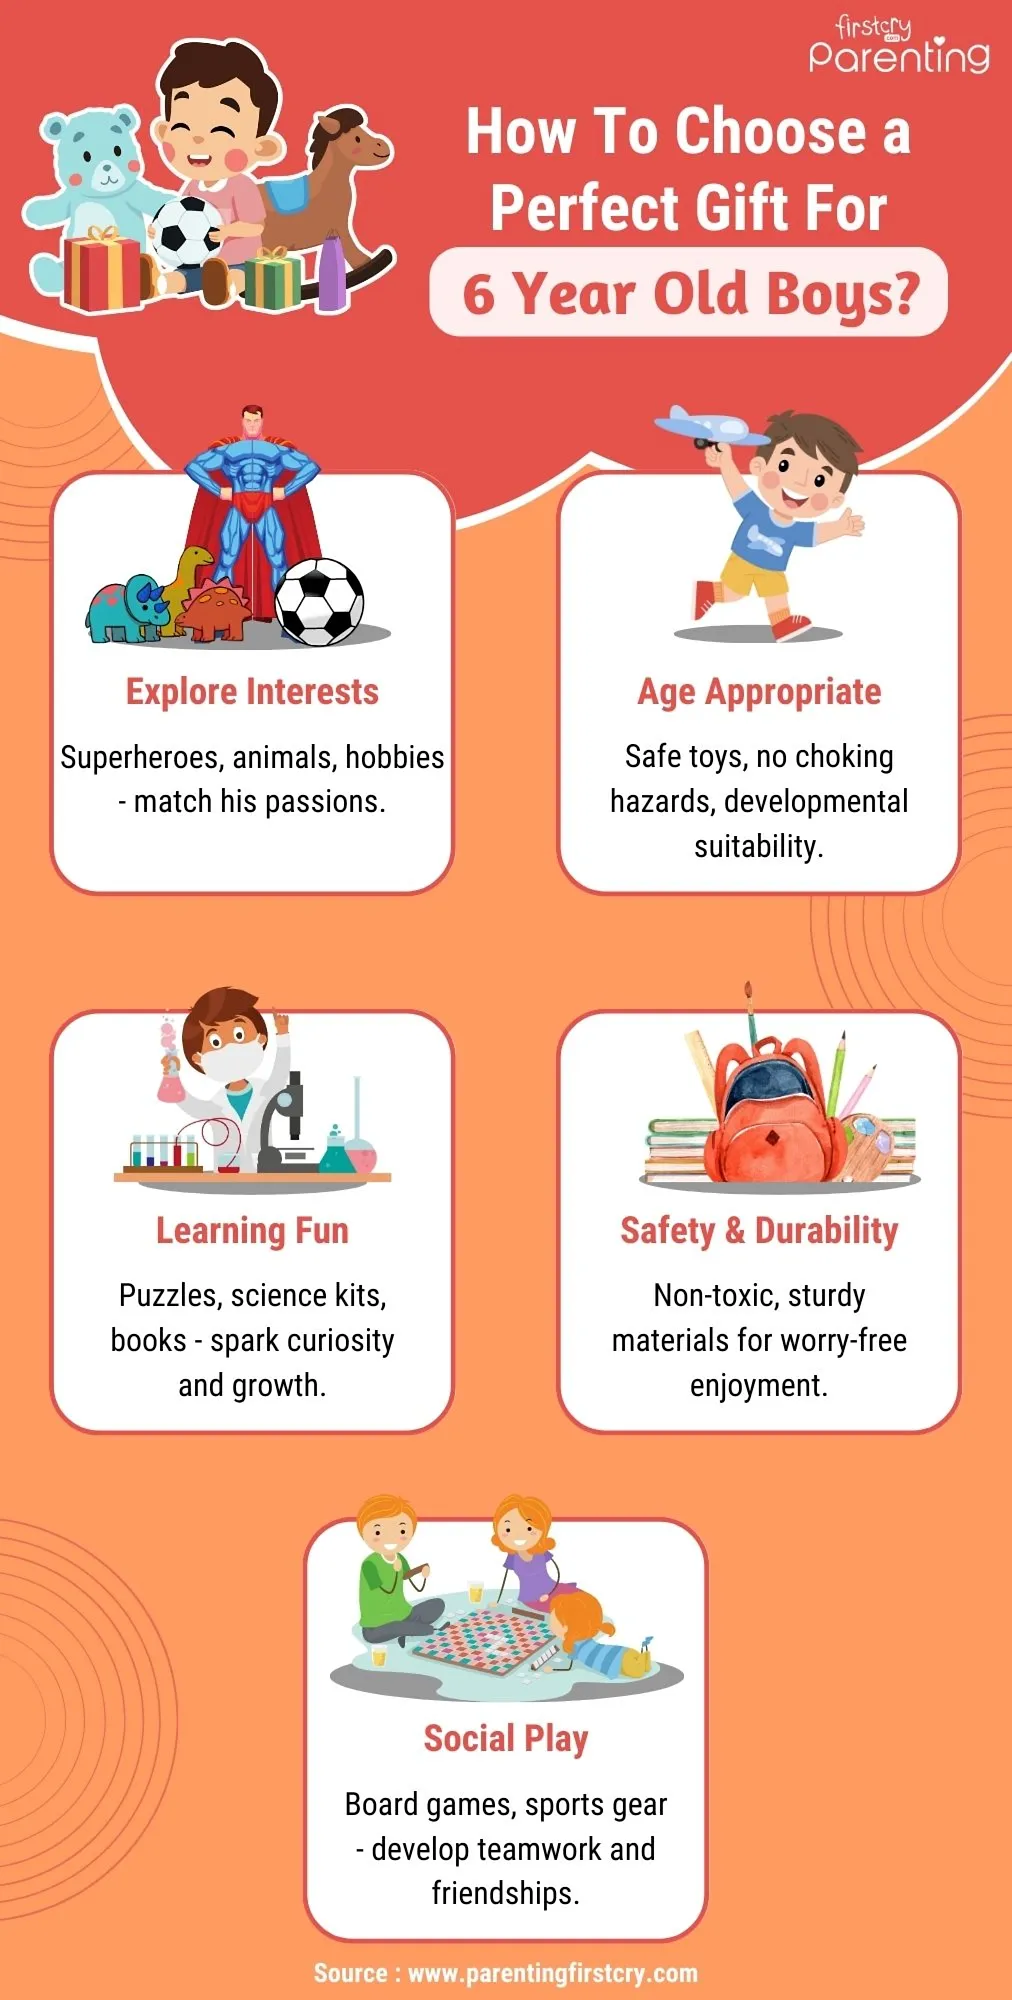 How To Choose a Perfect Gift For 6 Year Old Boys - Infographic